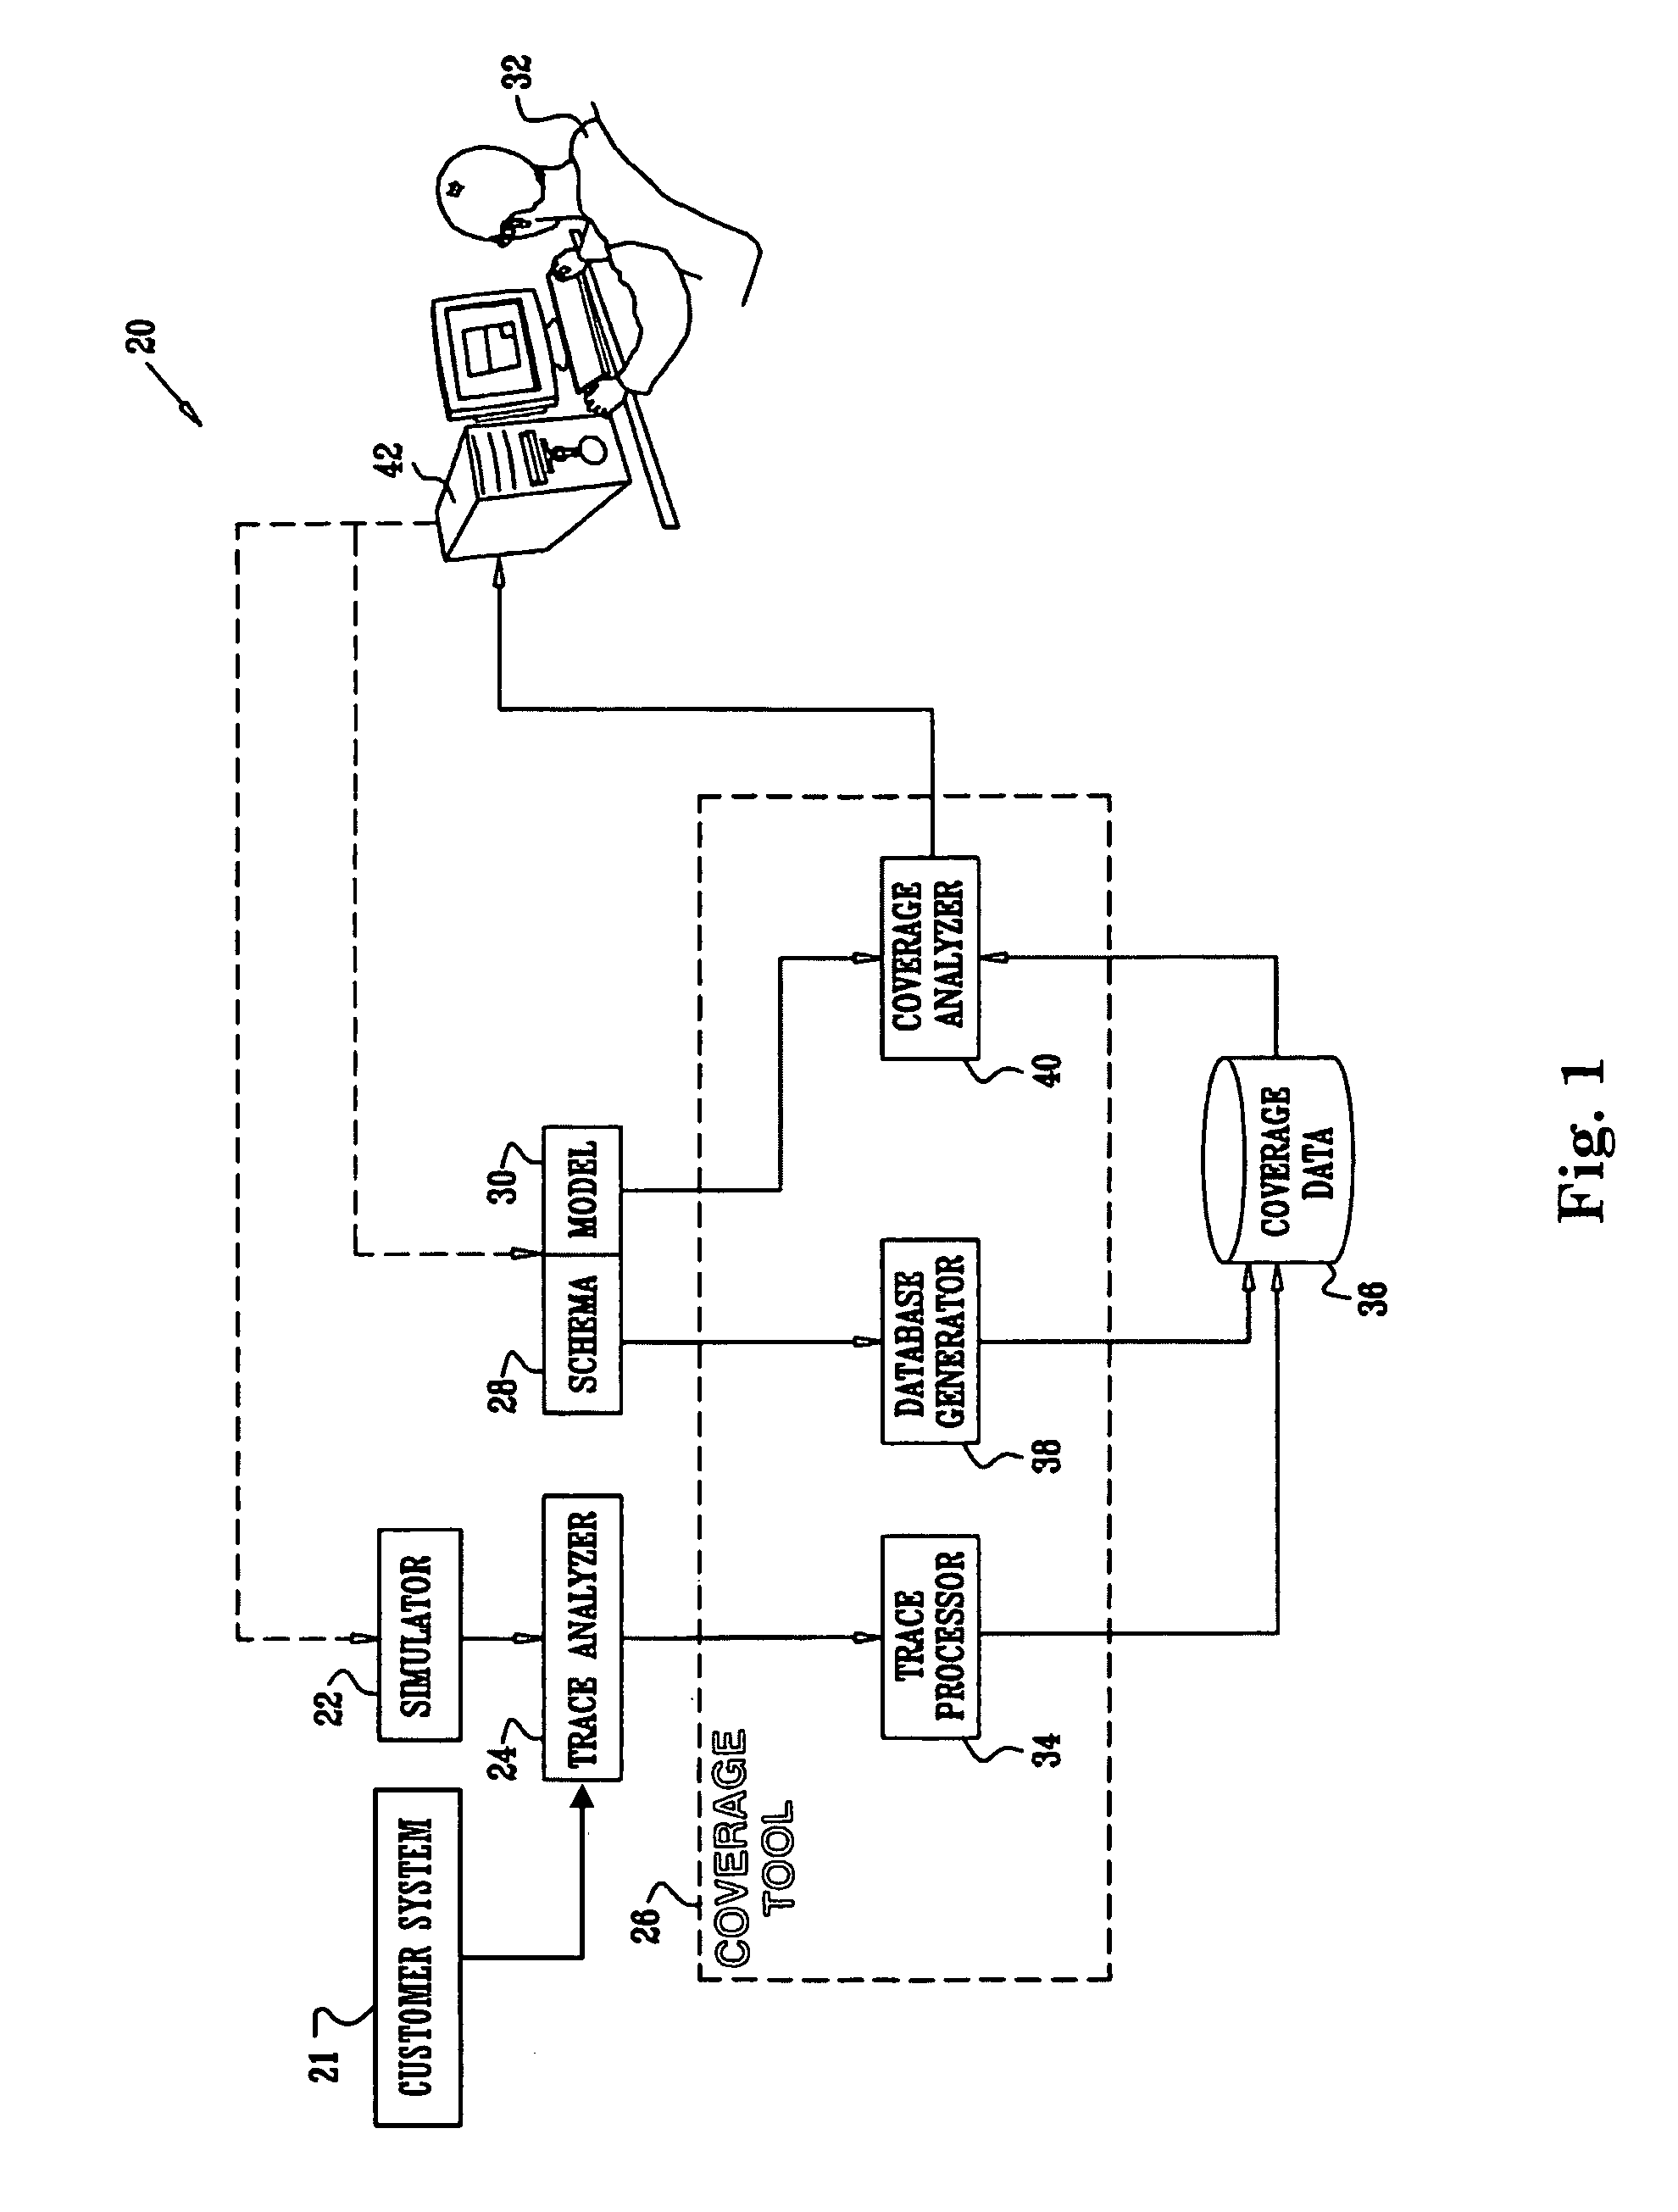 Method for comparing customer and test load data with comparative functional coverage hole analysis